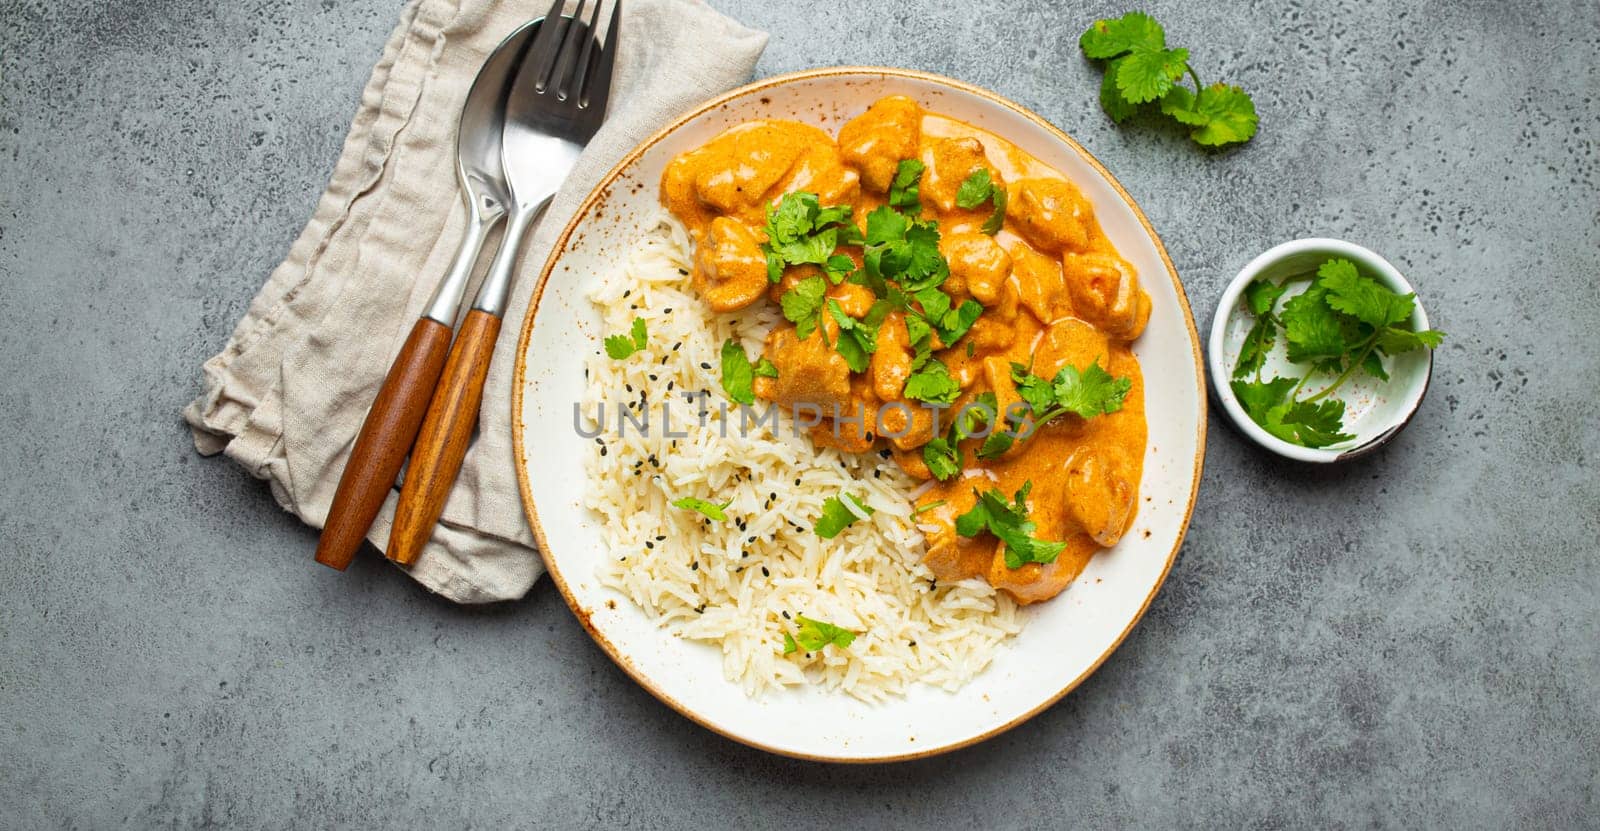 Traditional Indian dish chicken curry with basmati rice and fresh cilantro on rustic white plate on gray concrete table background from above. Indian dinner meal by its_al_dente